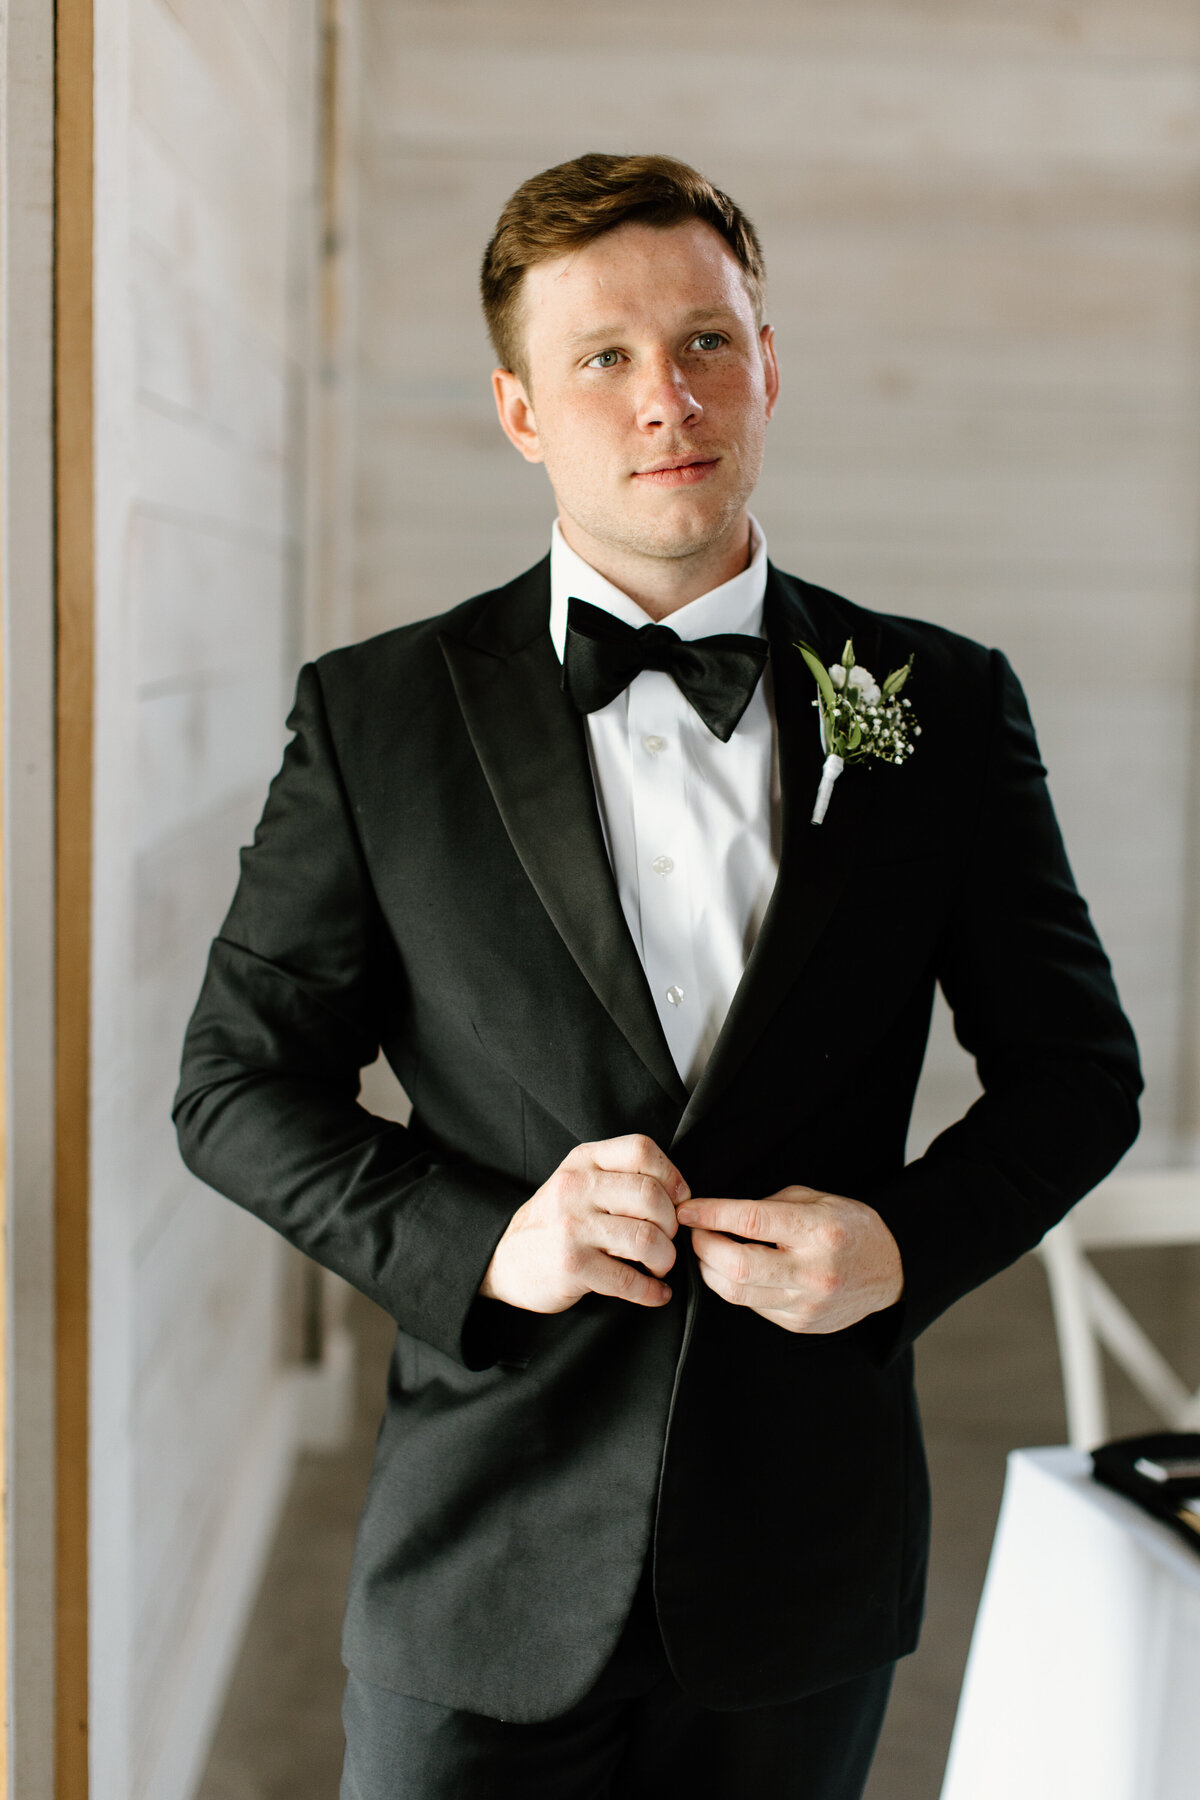 Groom wearing black and white tux with bowtie